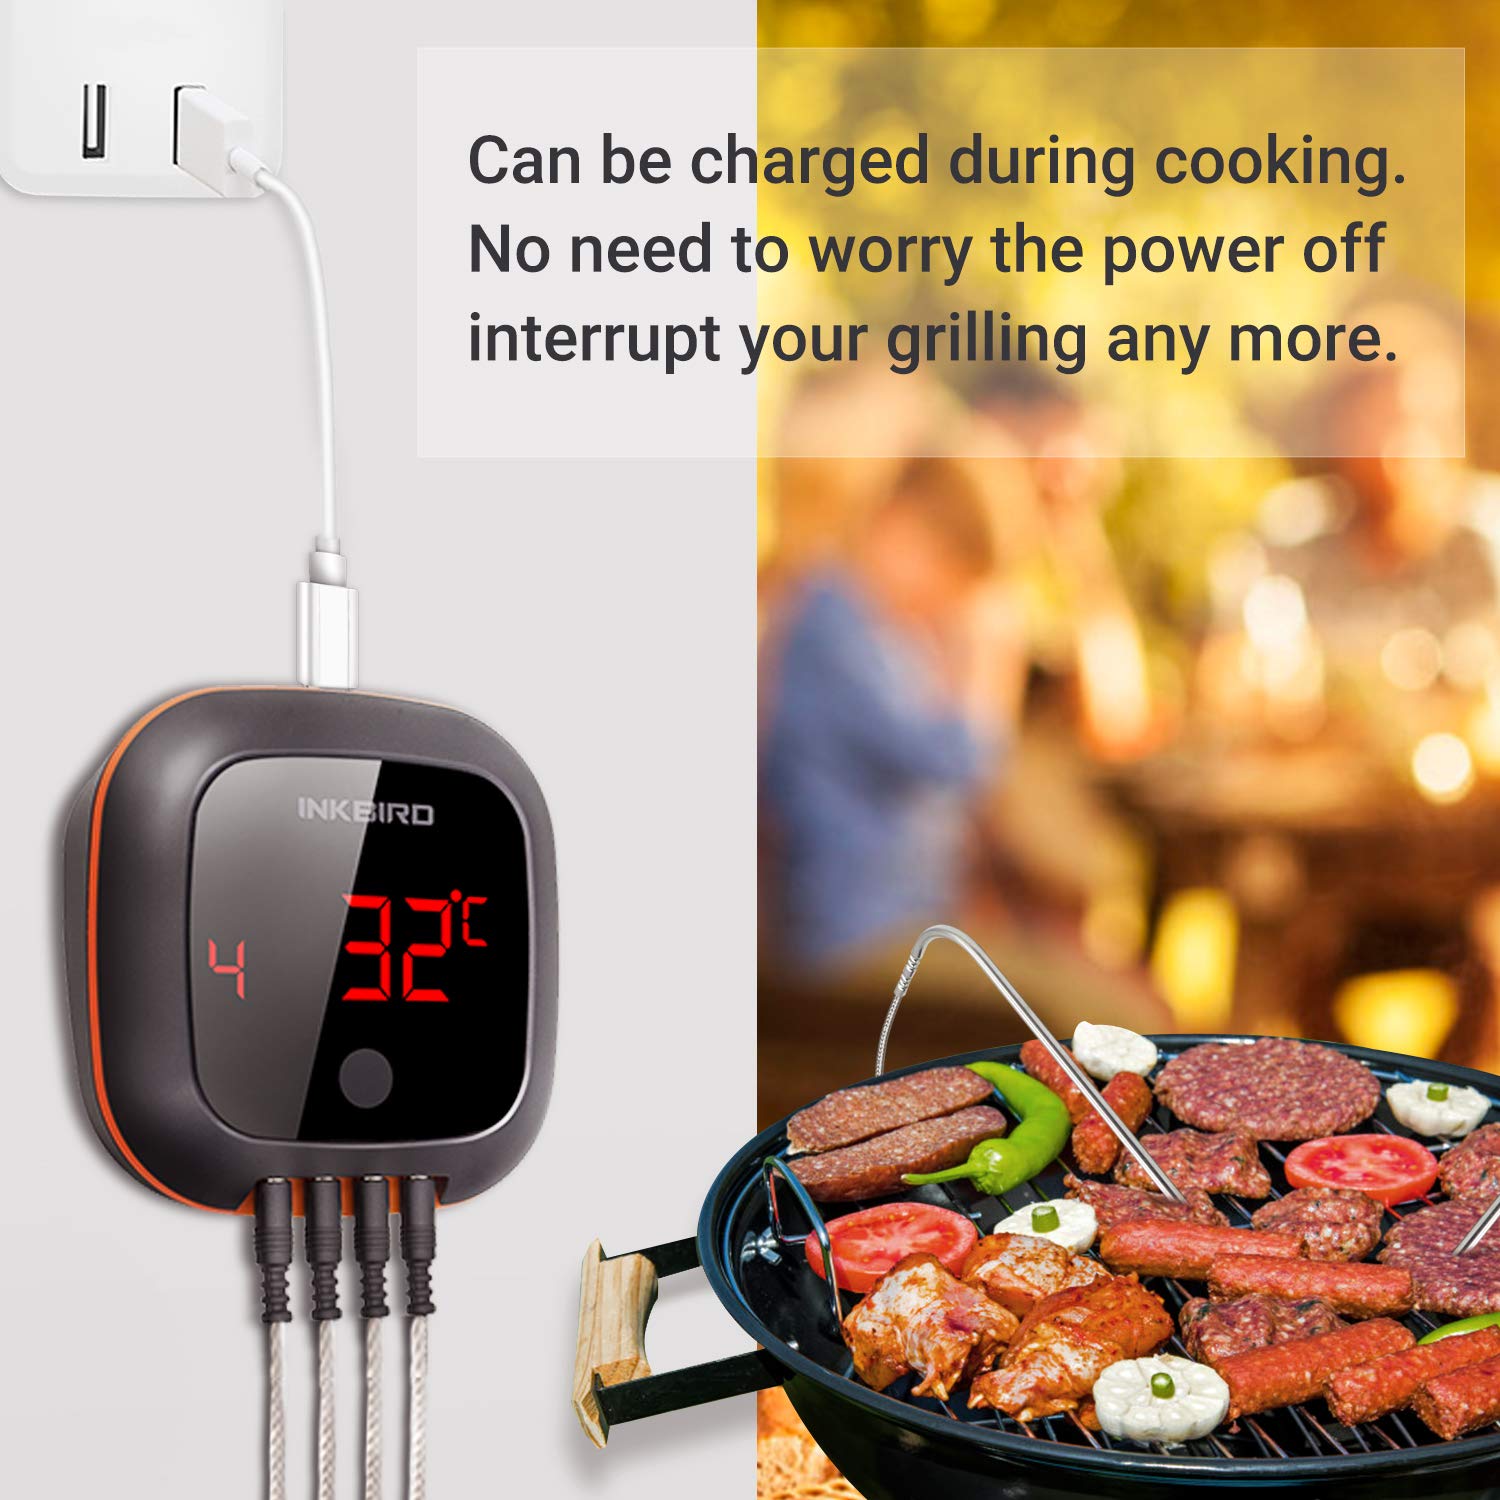 433MHz Wireless BBQ Meat Thermometer Dual Probe for Grilling